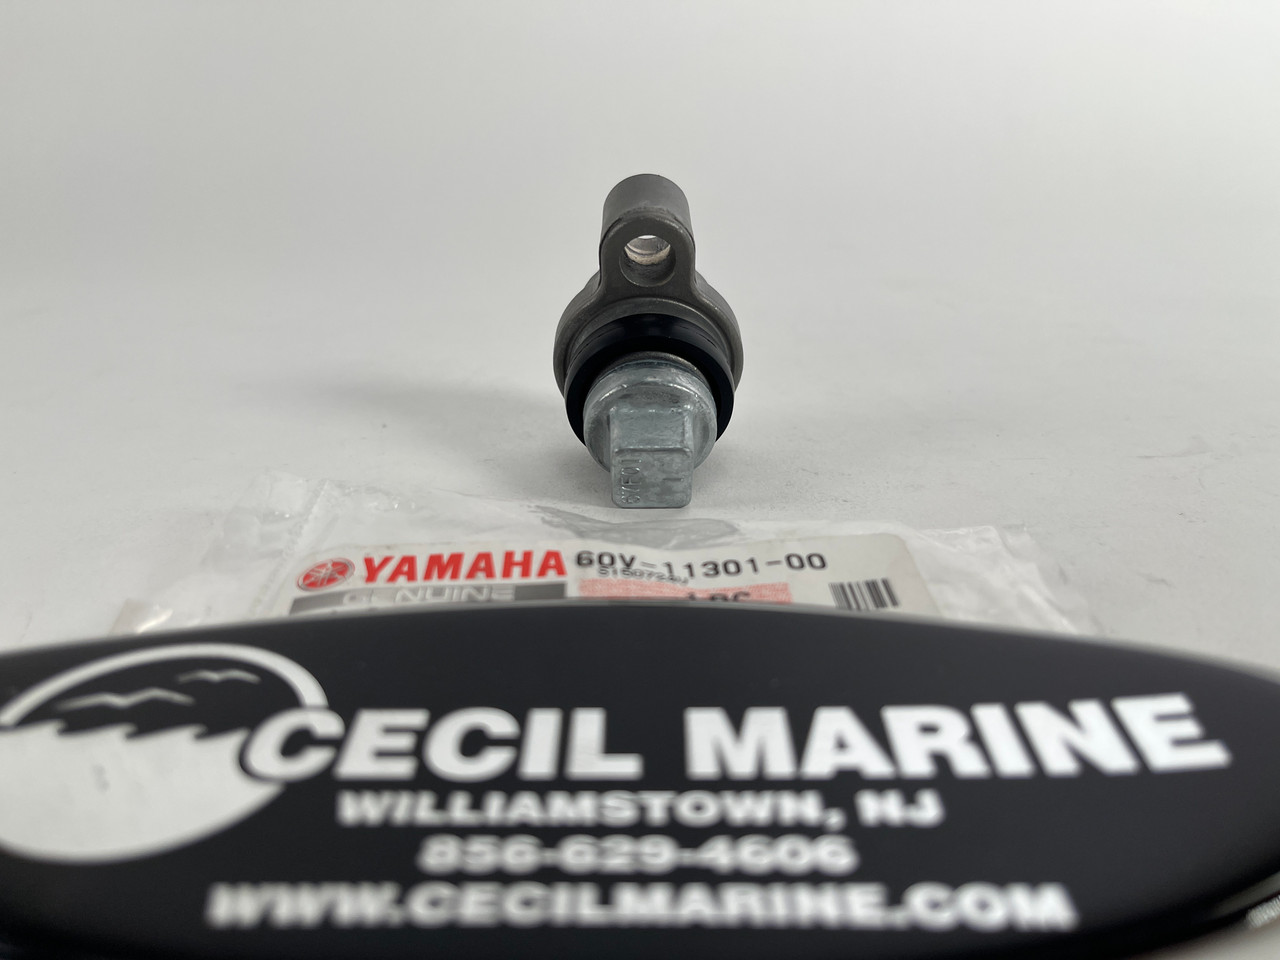 $29.99* GENUINE YAMAHA no tax* ANODE COVER ASSY 60V-11301-00-00 *In Stock & Ready To Ship